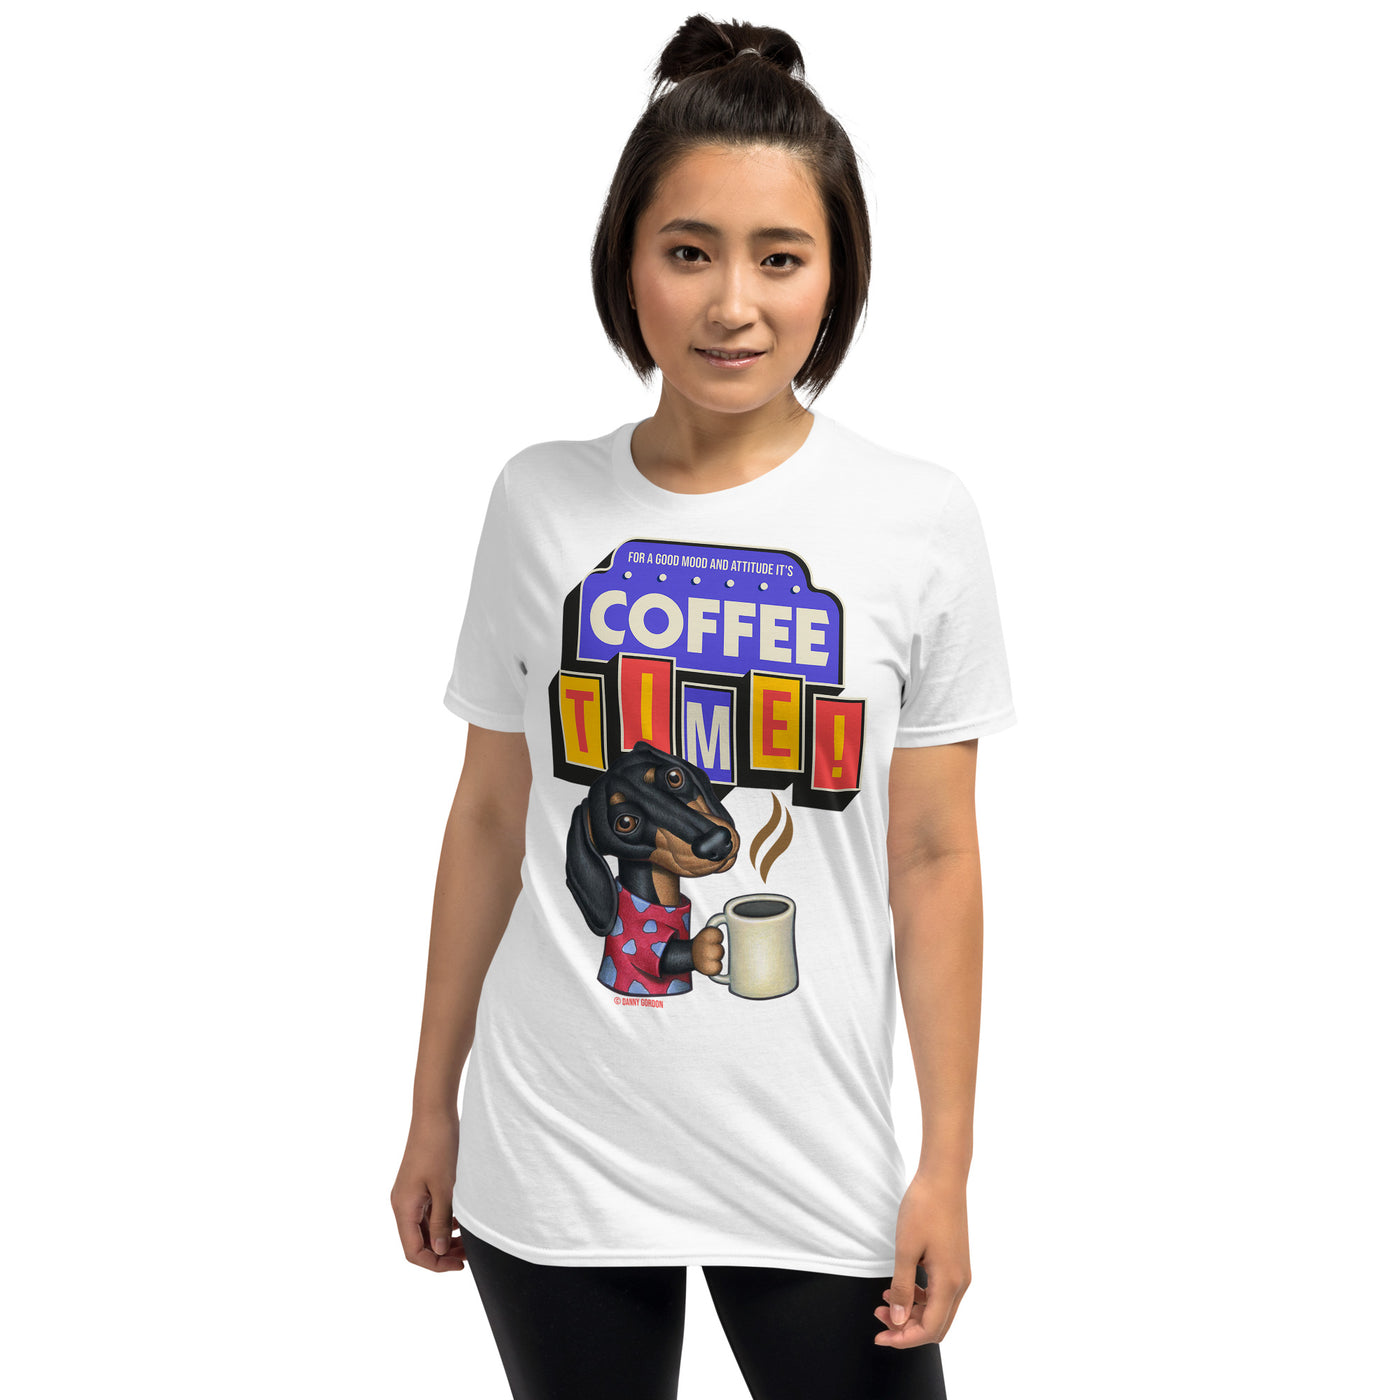 Funny Cute Doxie Dog  with morning java on a  Dachshund Coffee Unisex T-Shirt